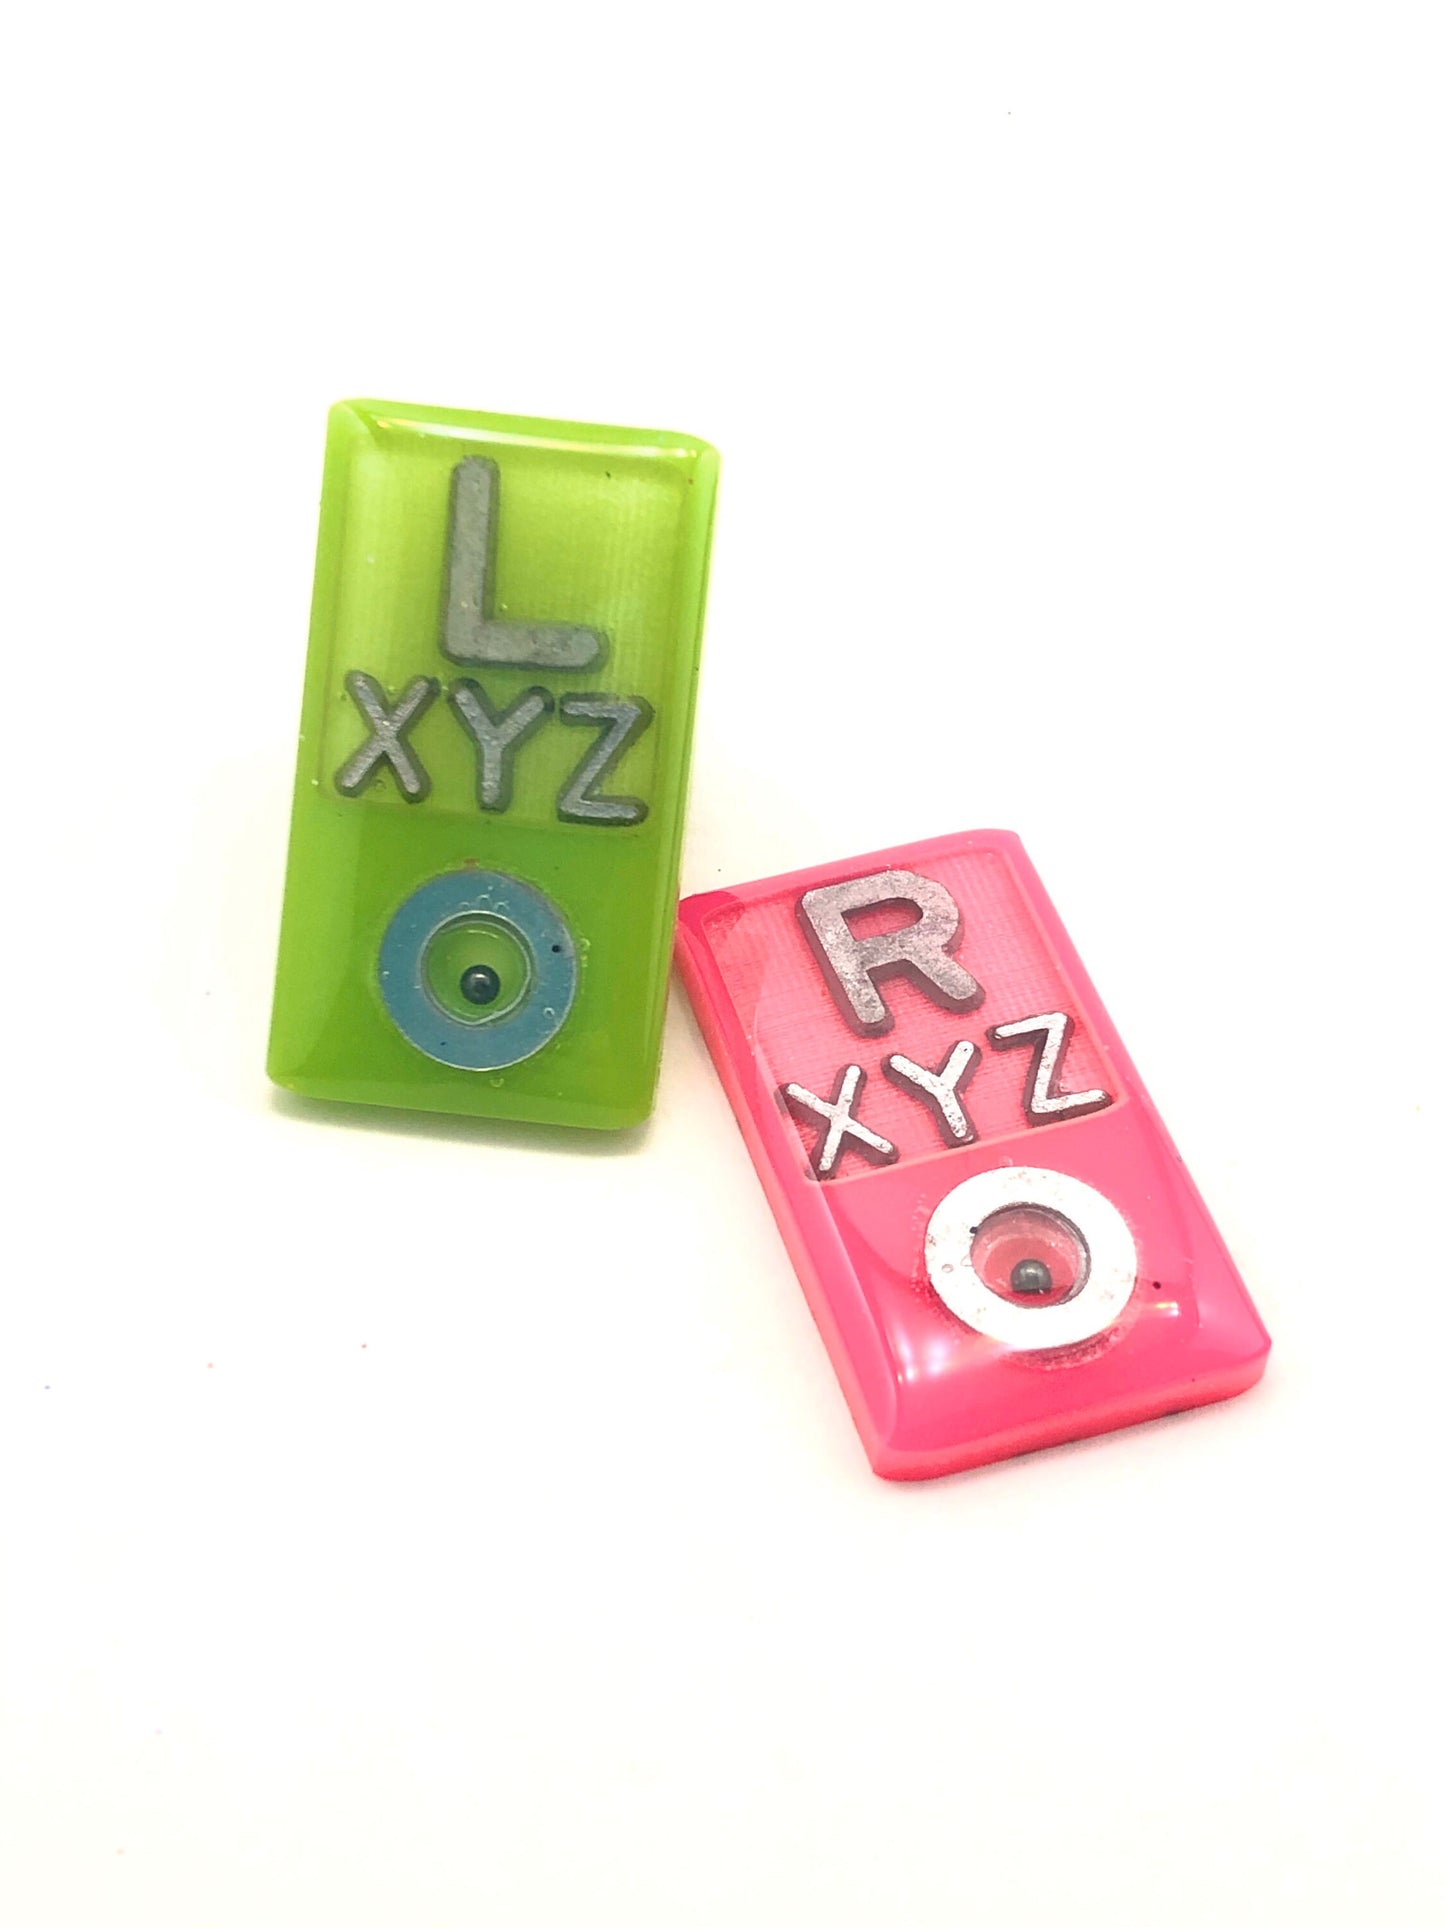 Shorty BB Position Bead  Xray Markers Customized with 2-3 initials